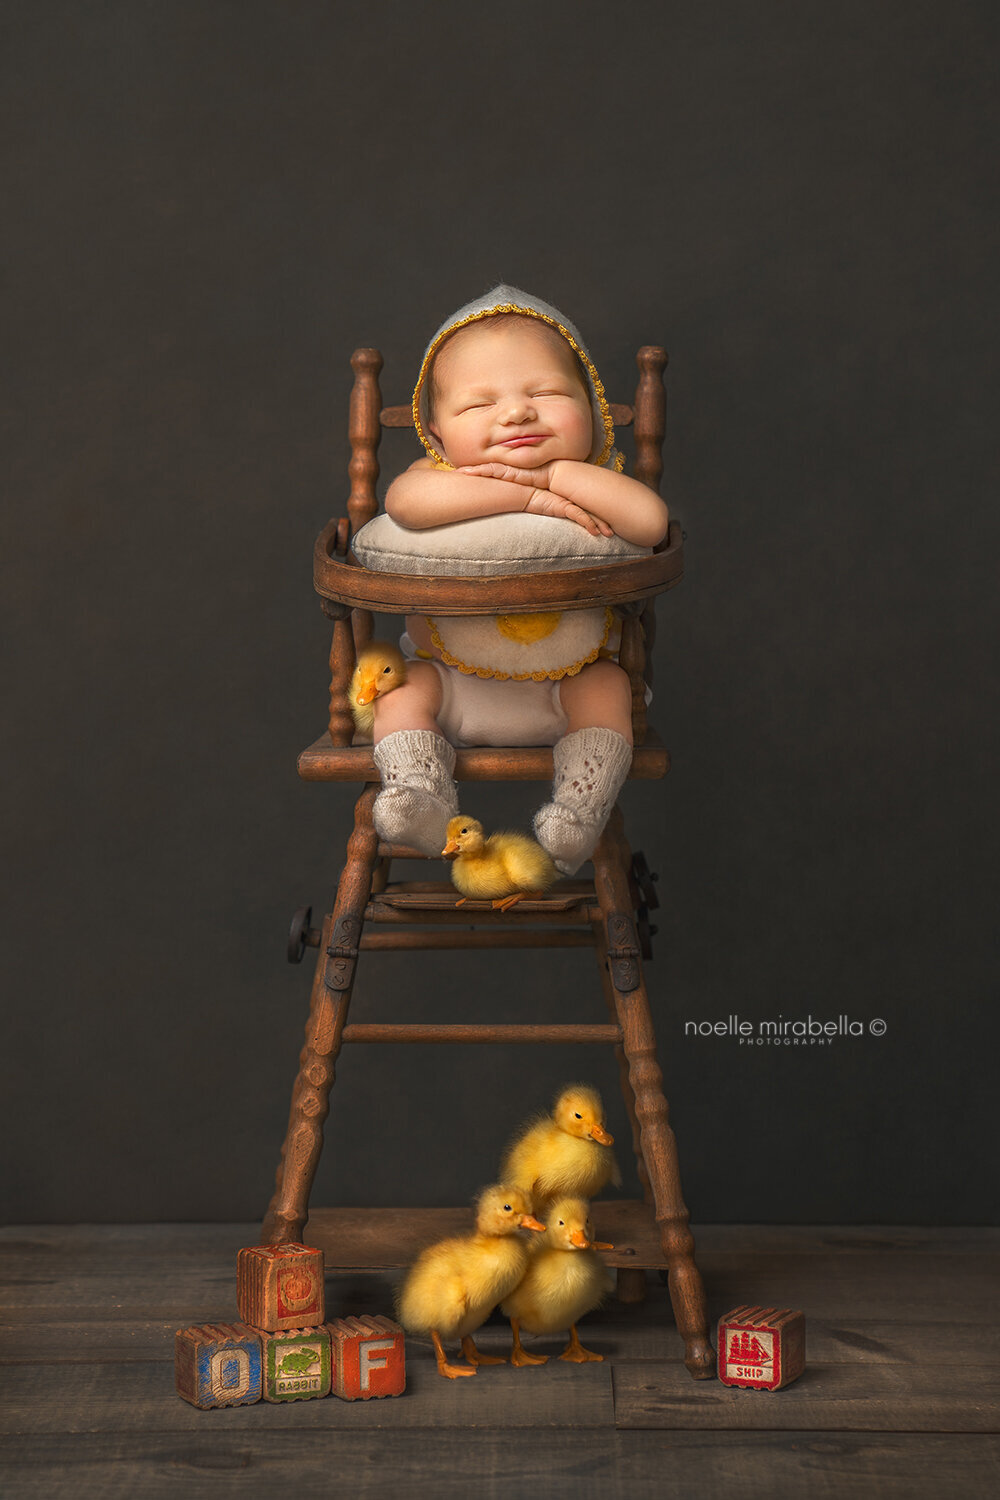 Newborn baby sleeping and smiling in doll high chair with baby ducklings.